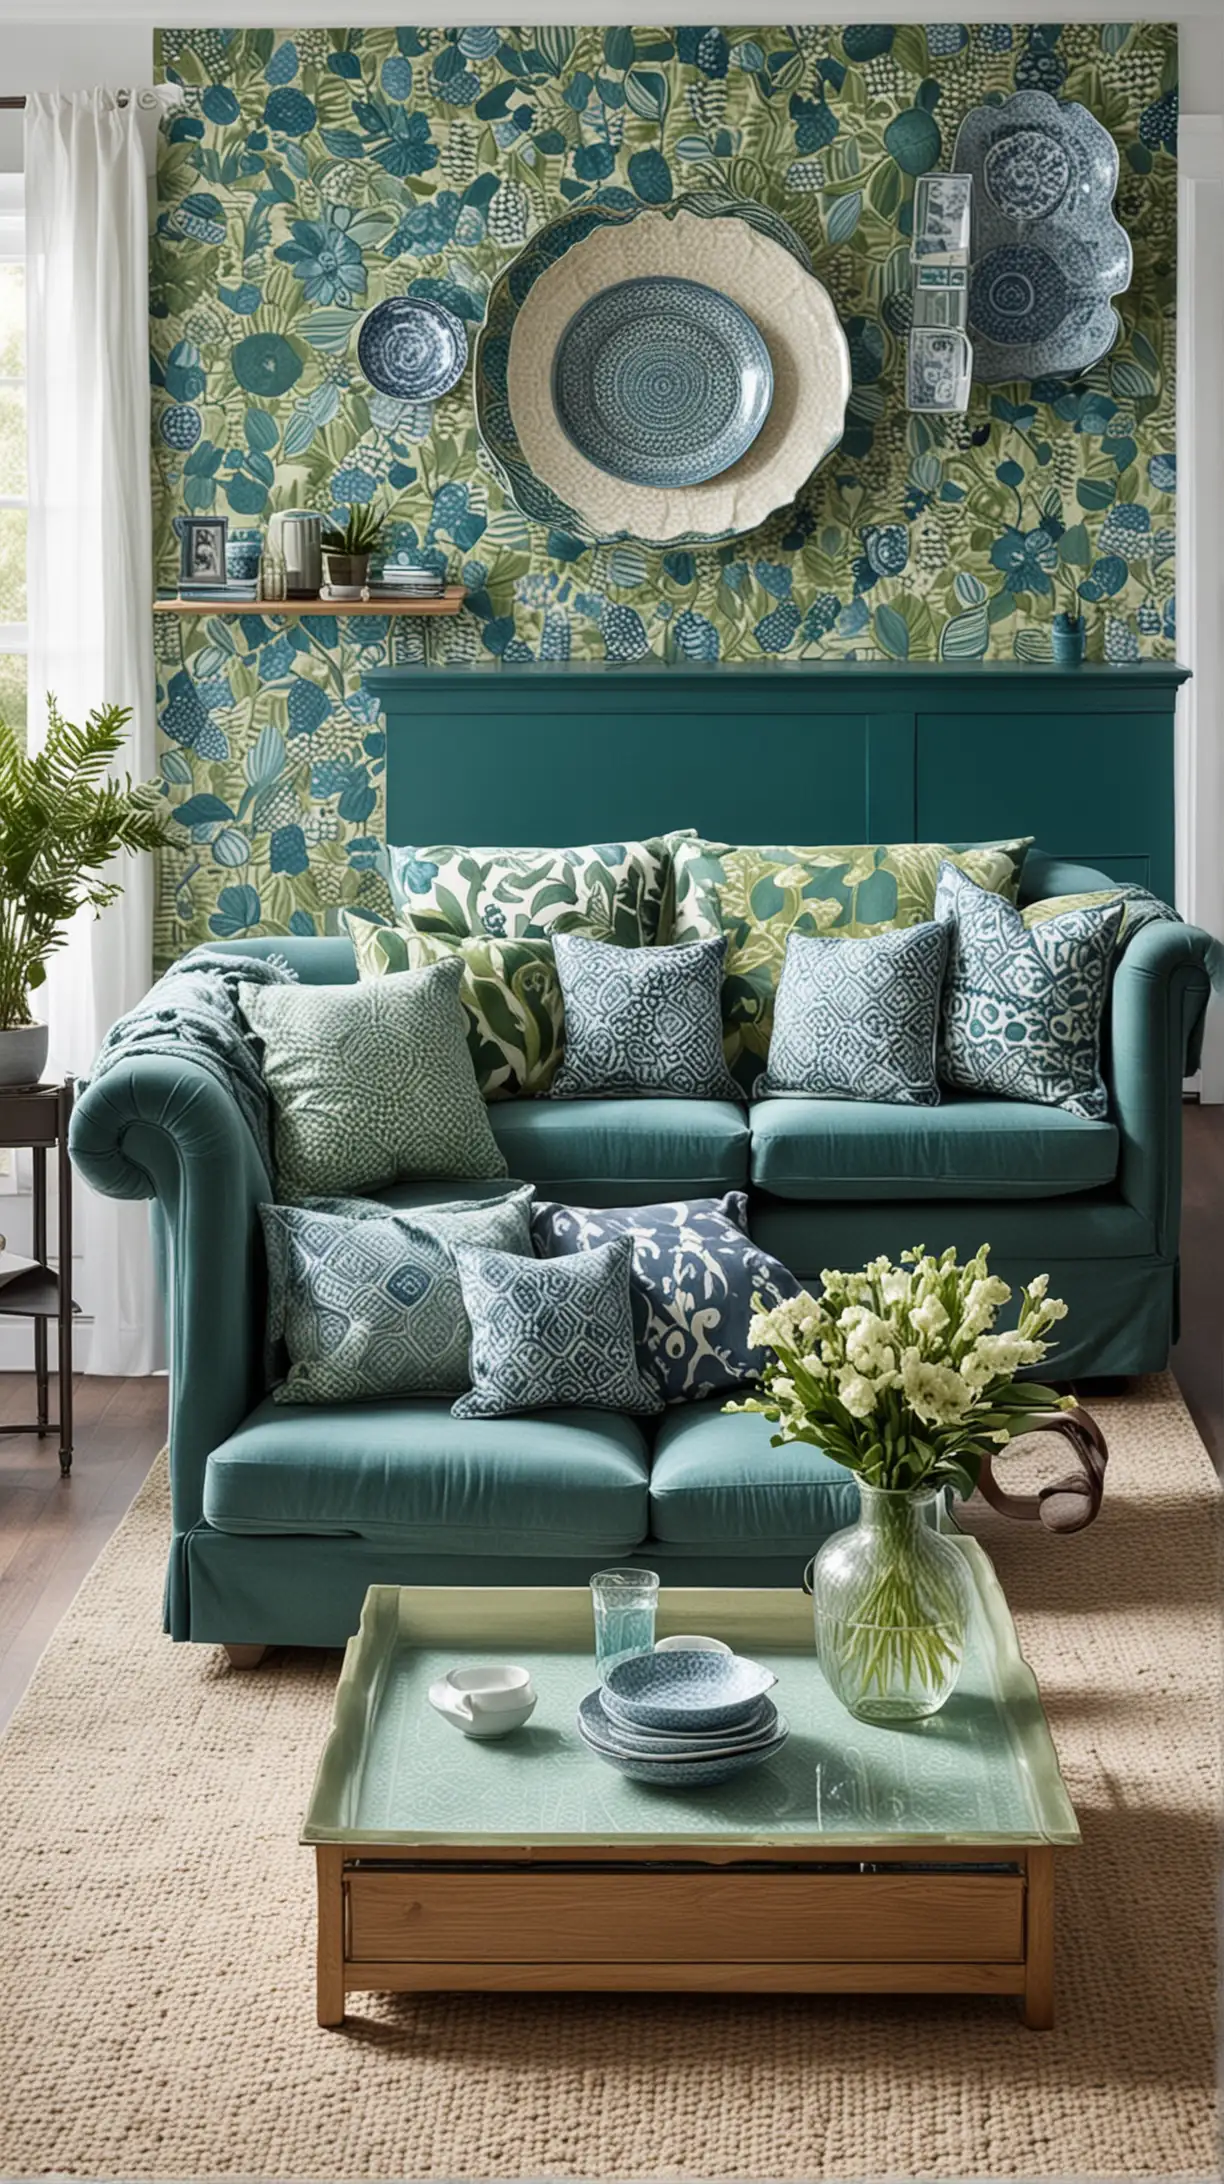 Elegant Blue and Green Living Room with Hanging Decorative Plates